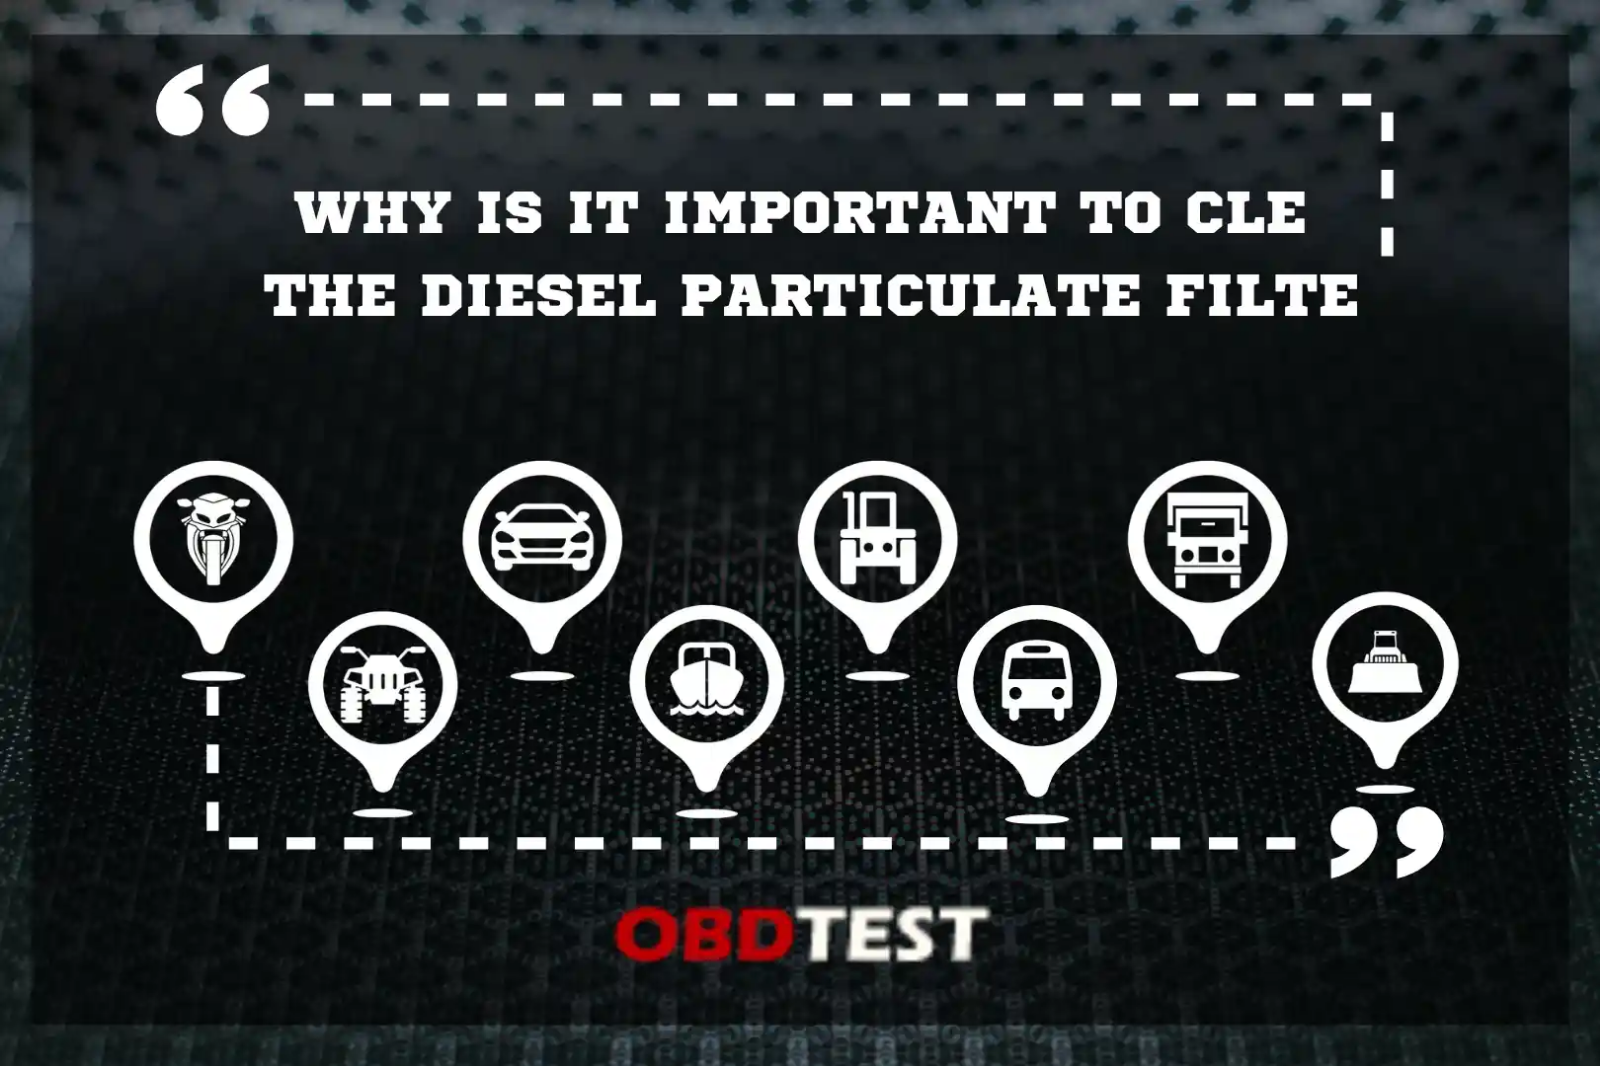 Why is it important to clean the DPF?